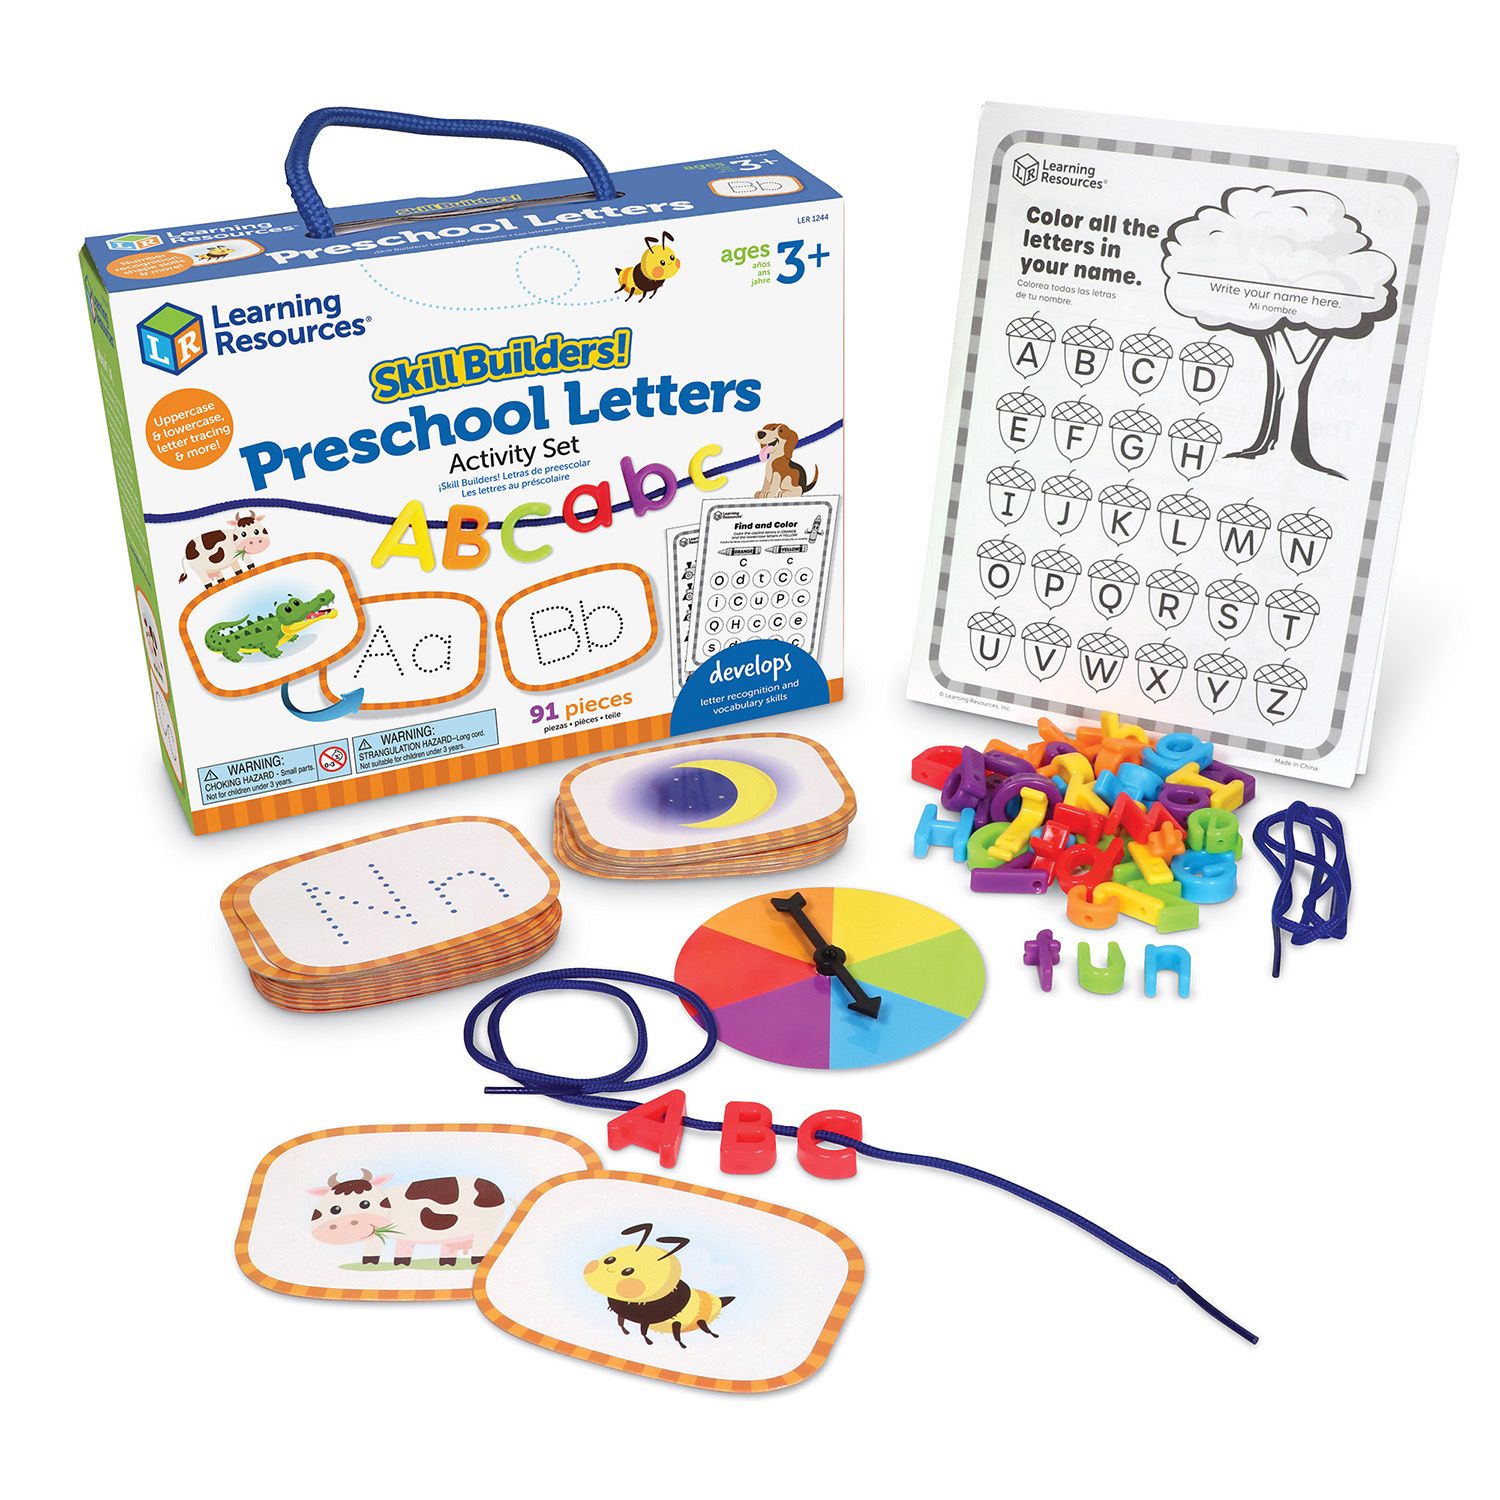 Image for Learning Resources Skill Builders! Preschool Letters at Kohl's.